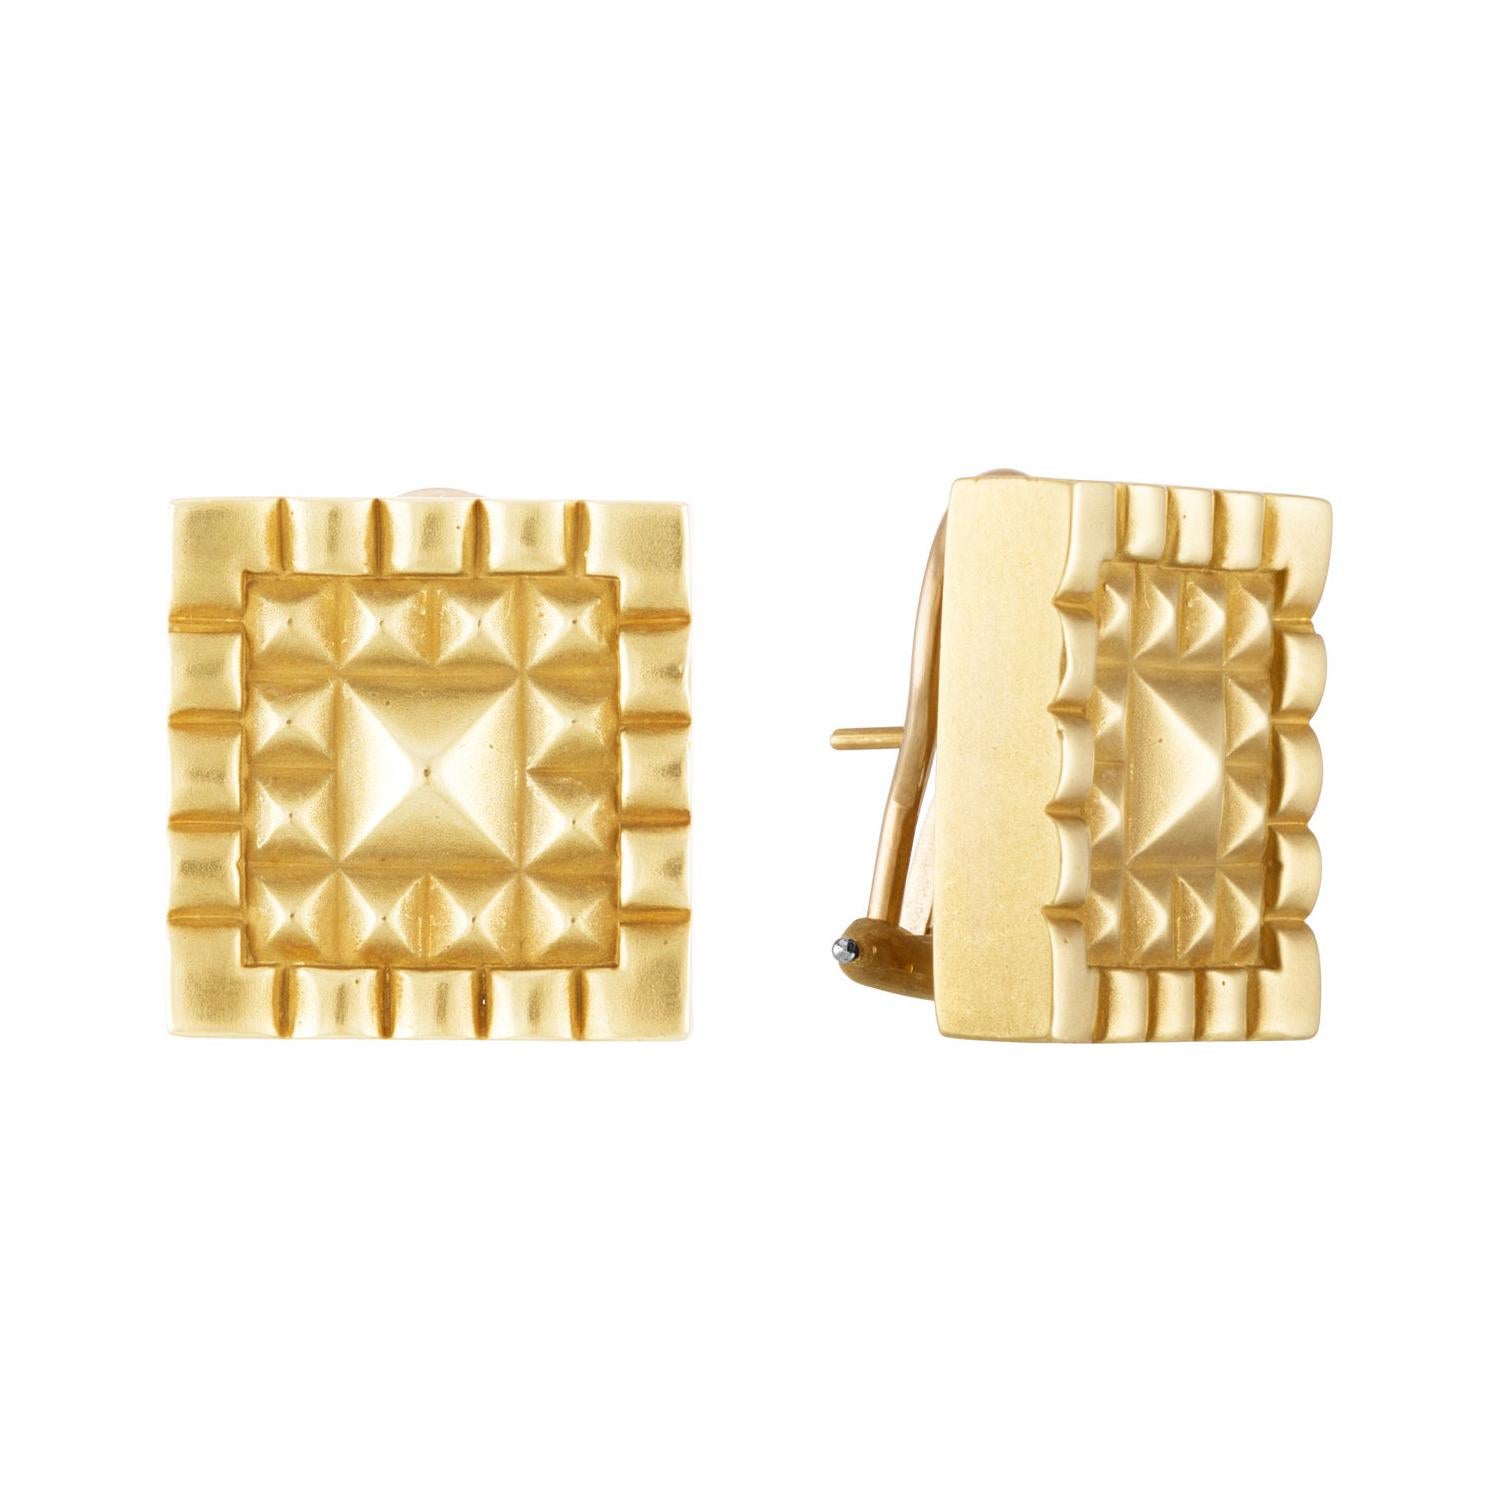 Barry Kieselstein-Cord Square Pyramid Textured Gold Earrings, 1984